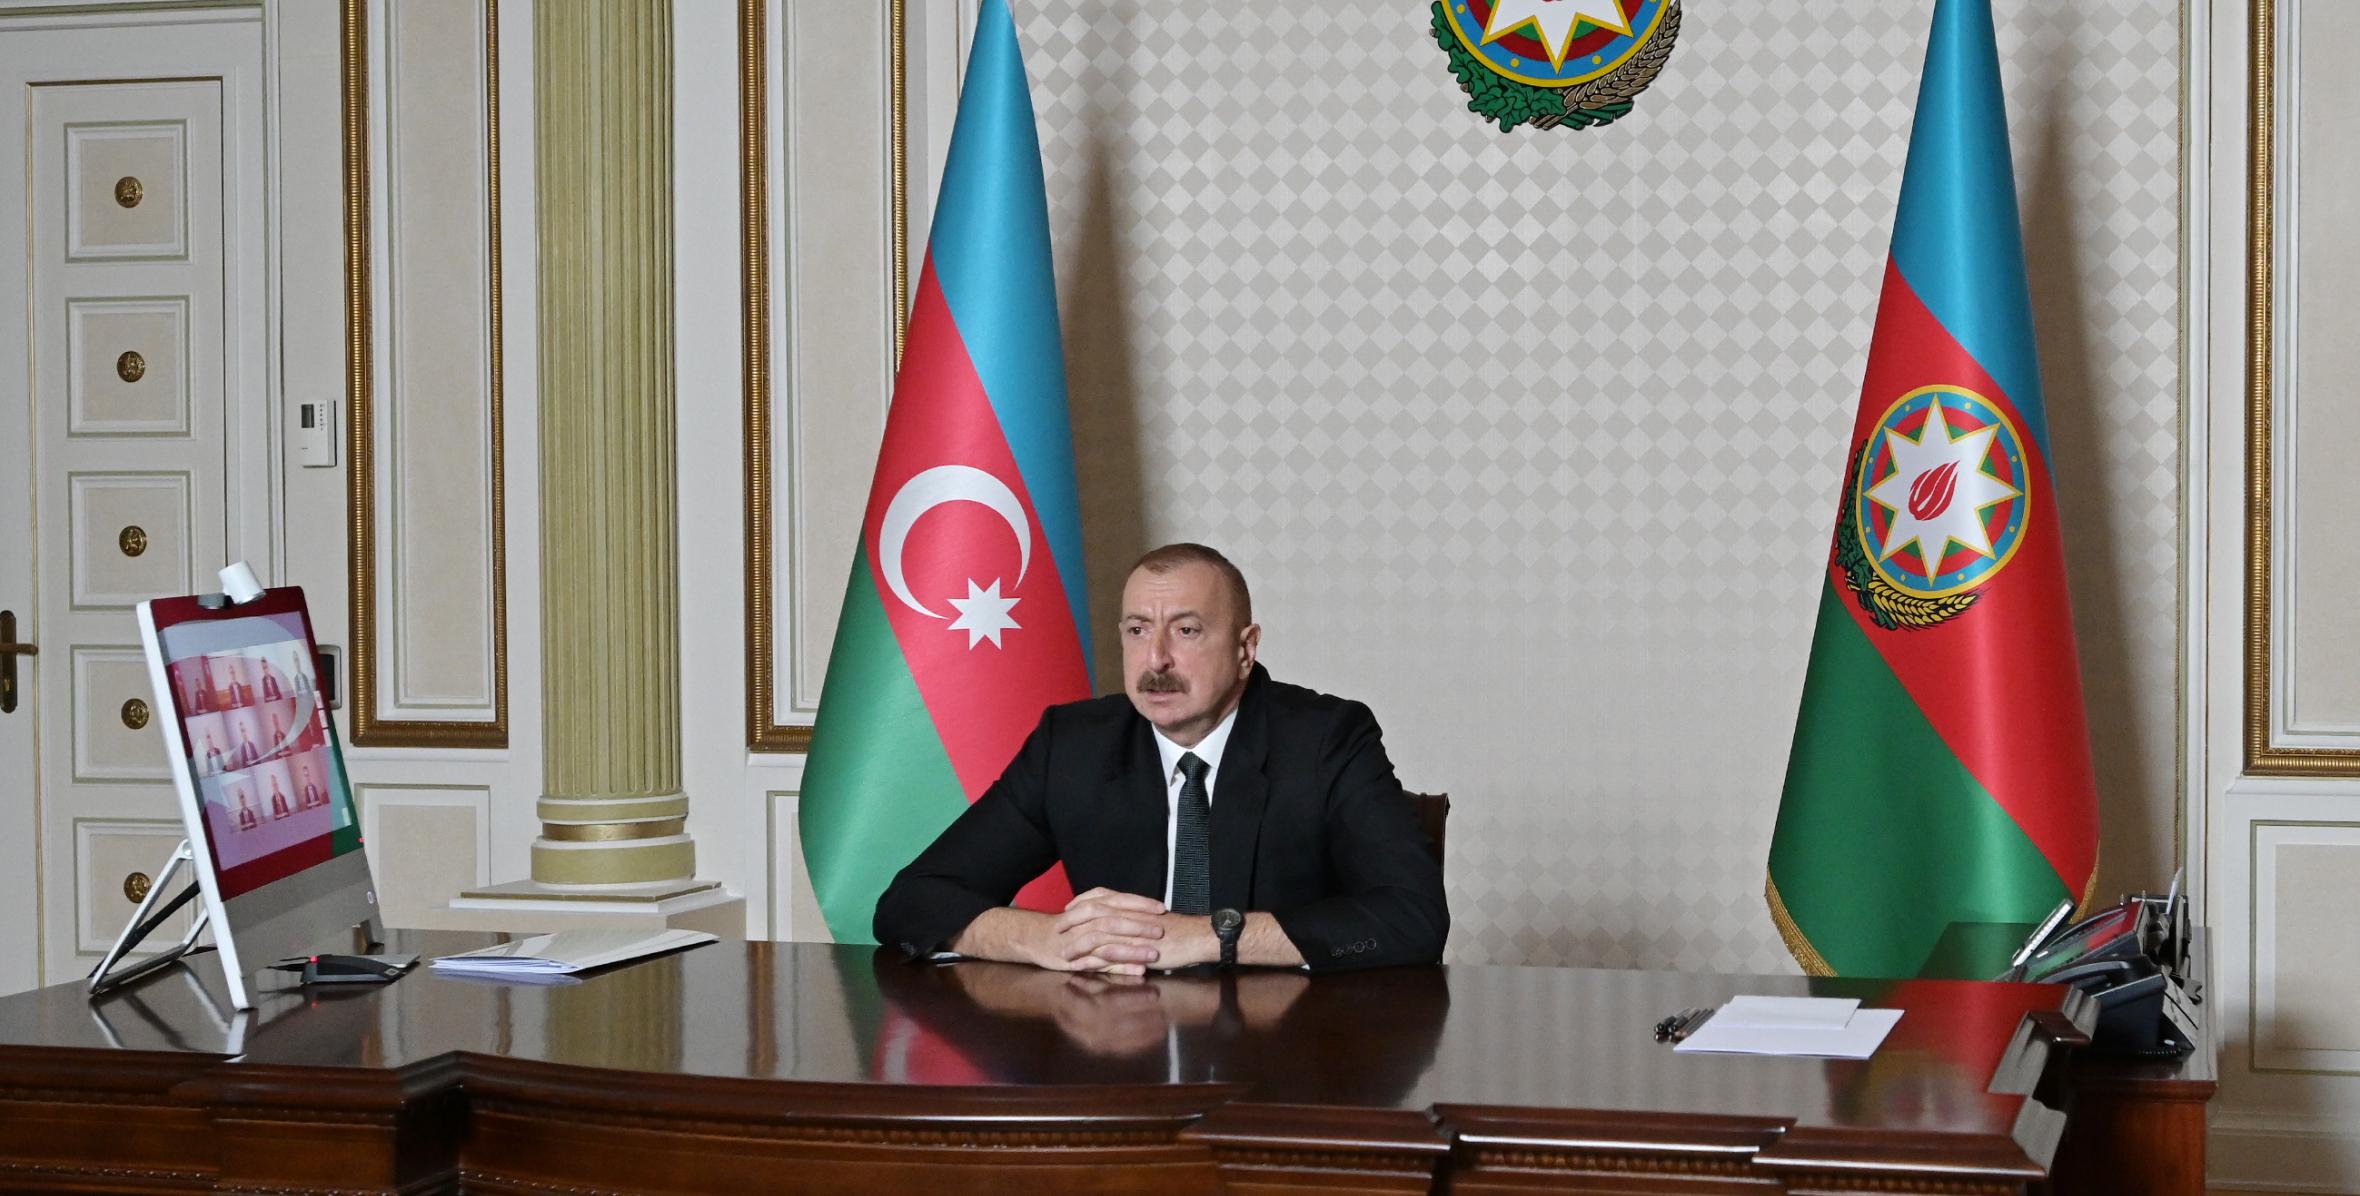 Ilham Aliyev chaired Cabinet meeting on results of socio-economic development in first quarter of 2020 and future tasks